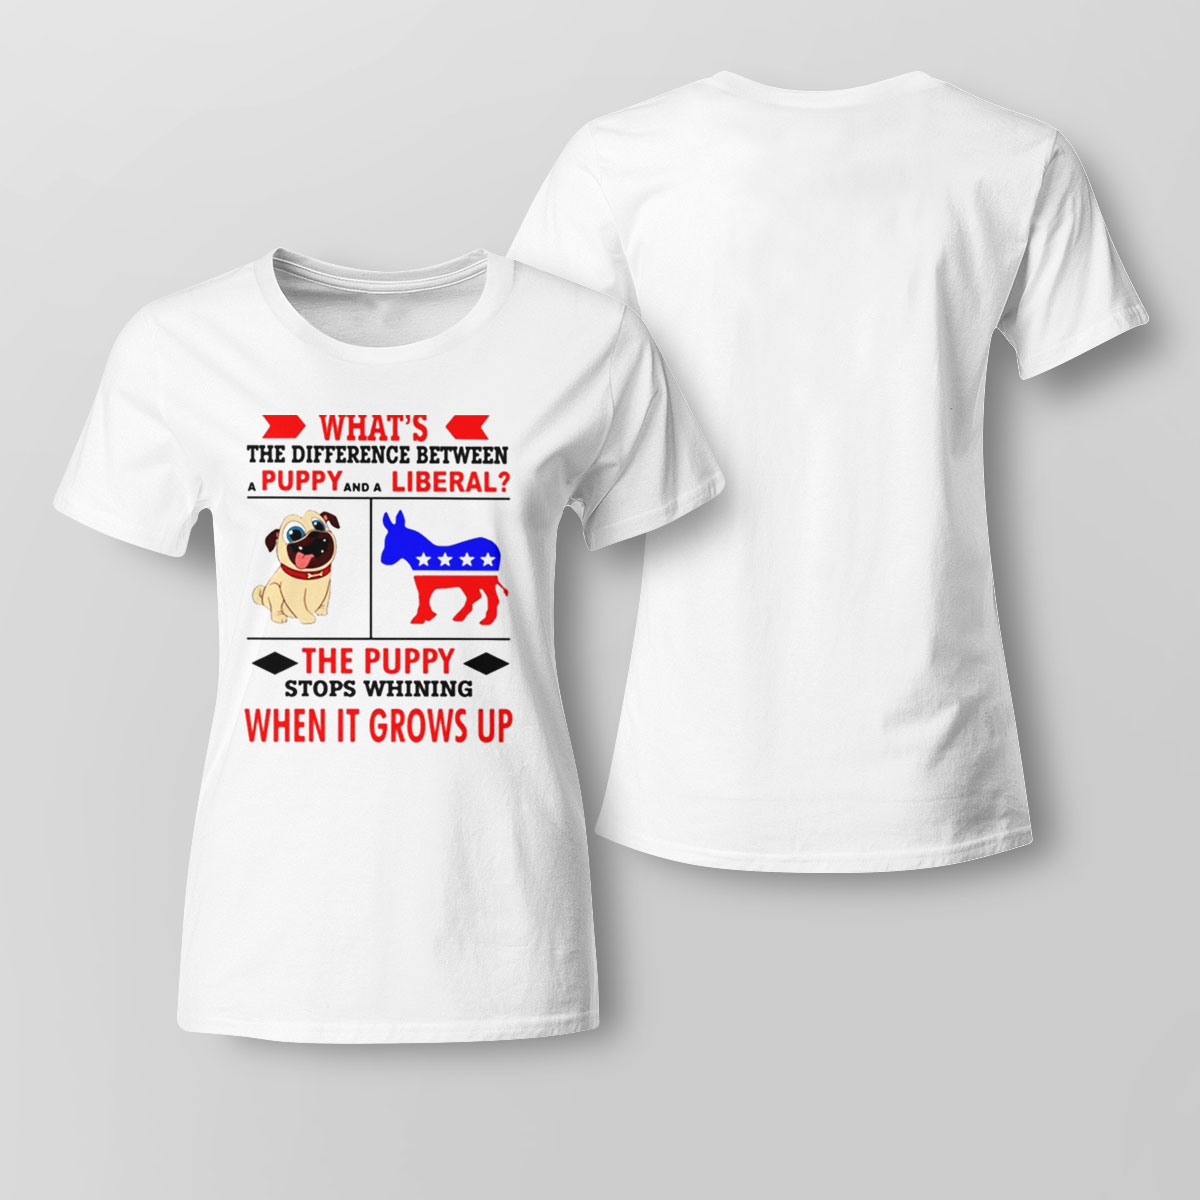 Whats The Difference Between A Puppy And A Liberal Shirt Sweatshirt, Tank Top, Ladies Tee